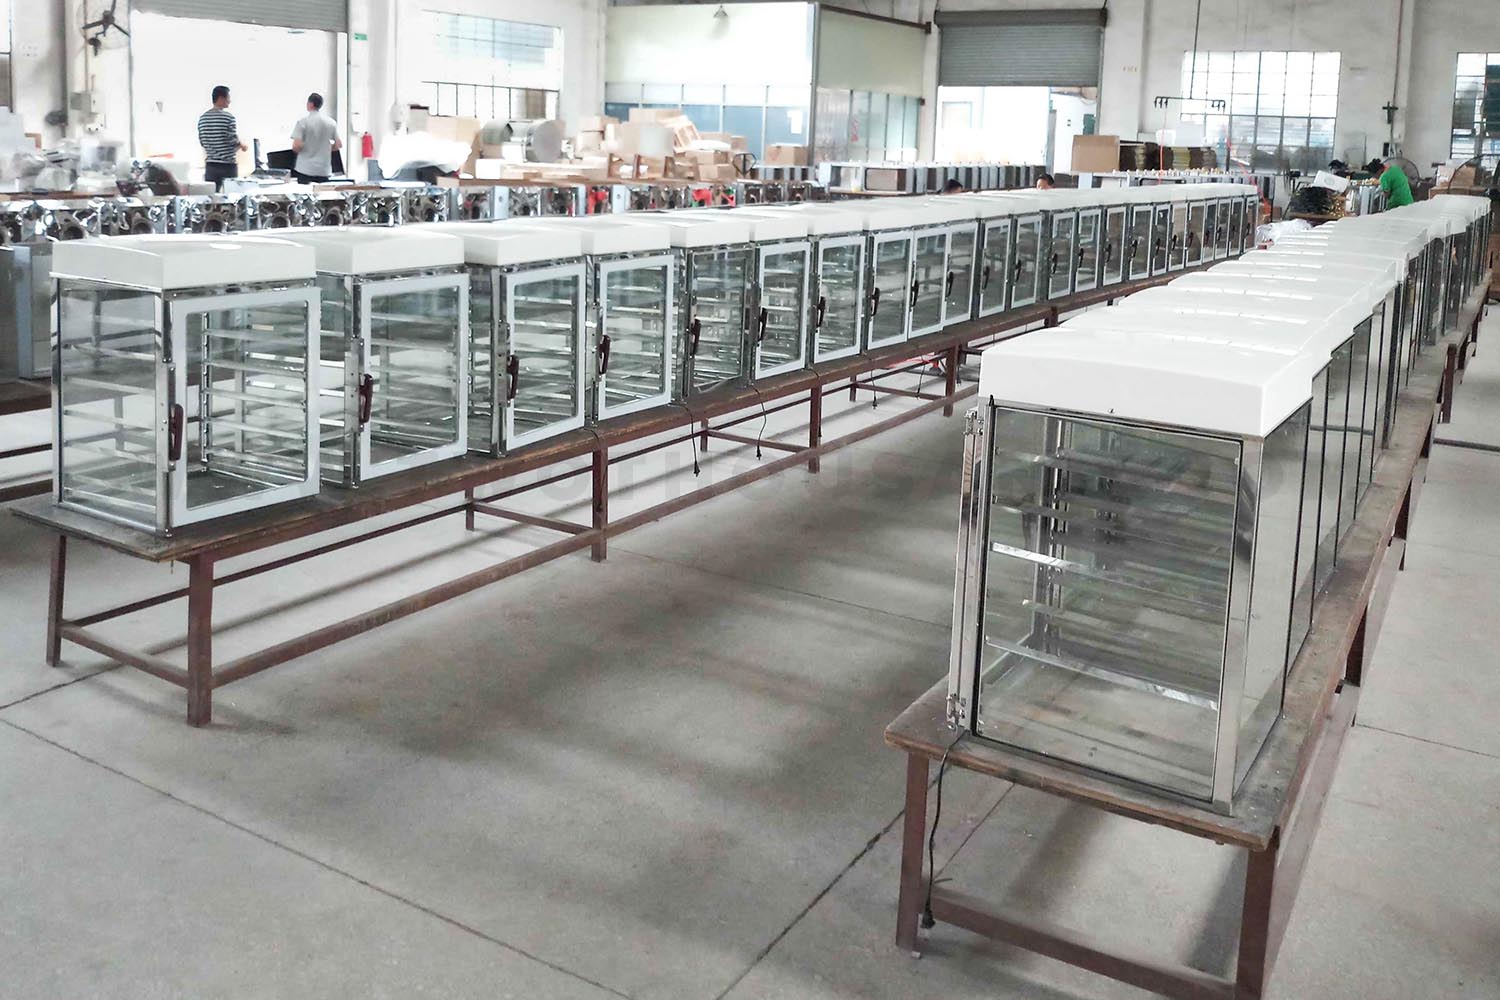 Hot Food Display Assembling Line - Twothousand Machinery